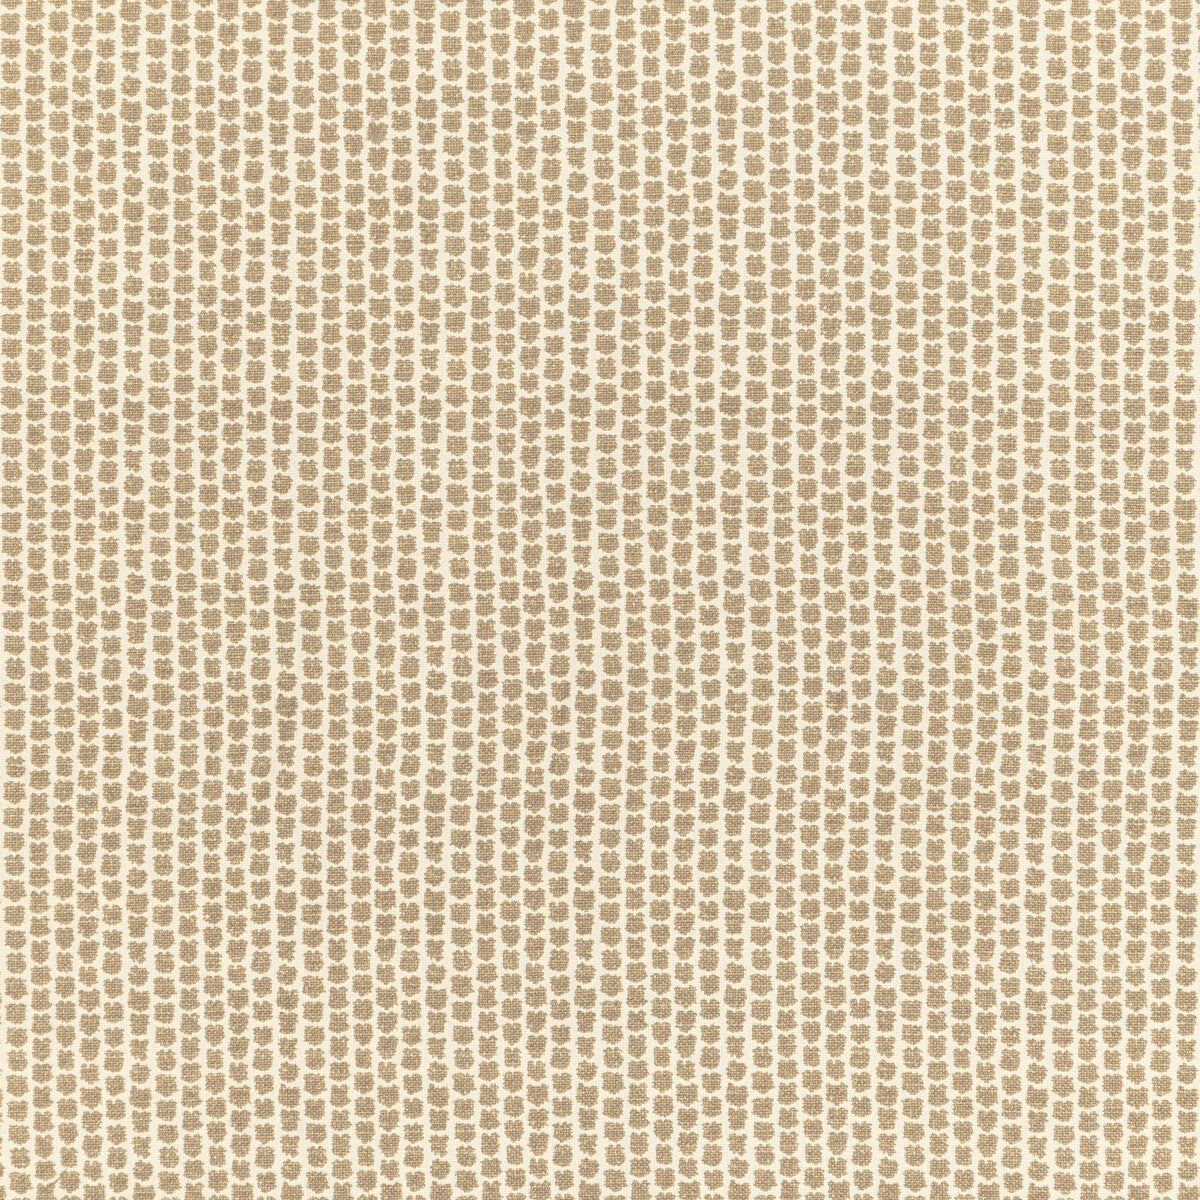 Kaya fabric in flax color - pattern 2012101.16.0 - by Lee Jofa in the Breckenridge collection